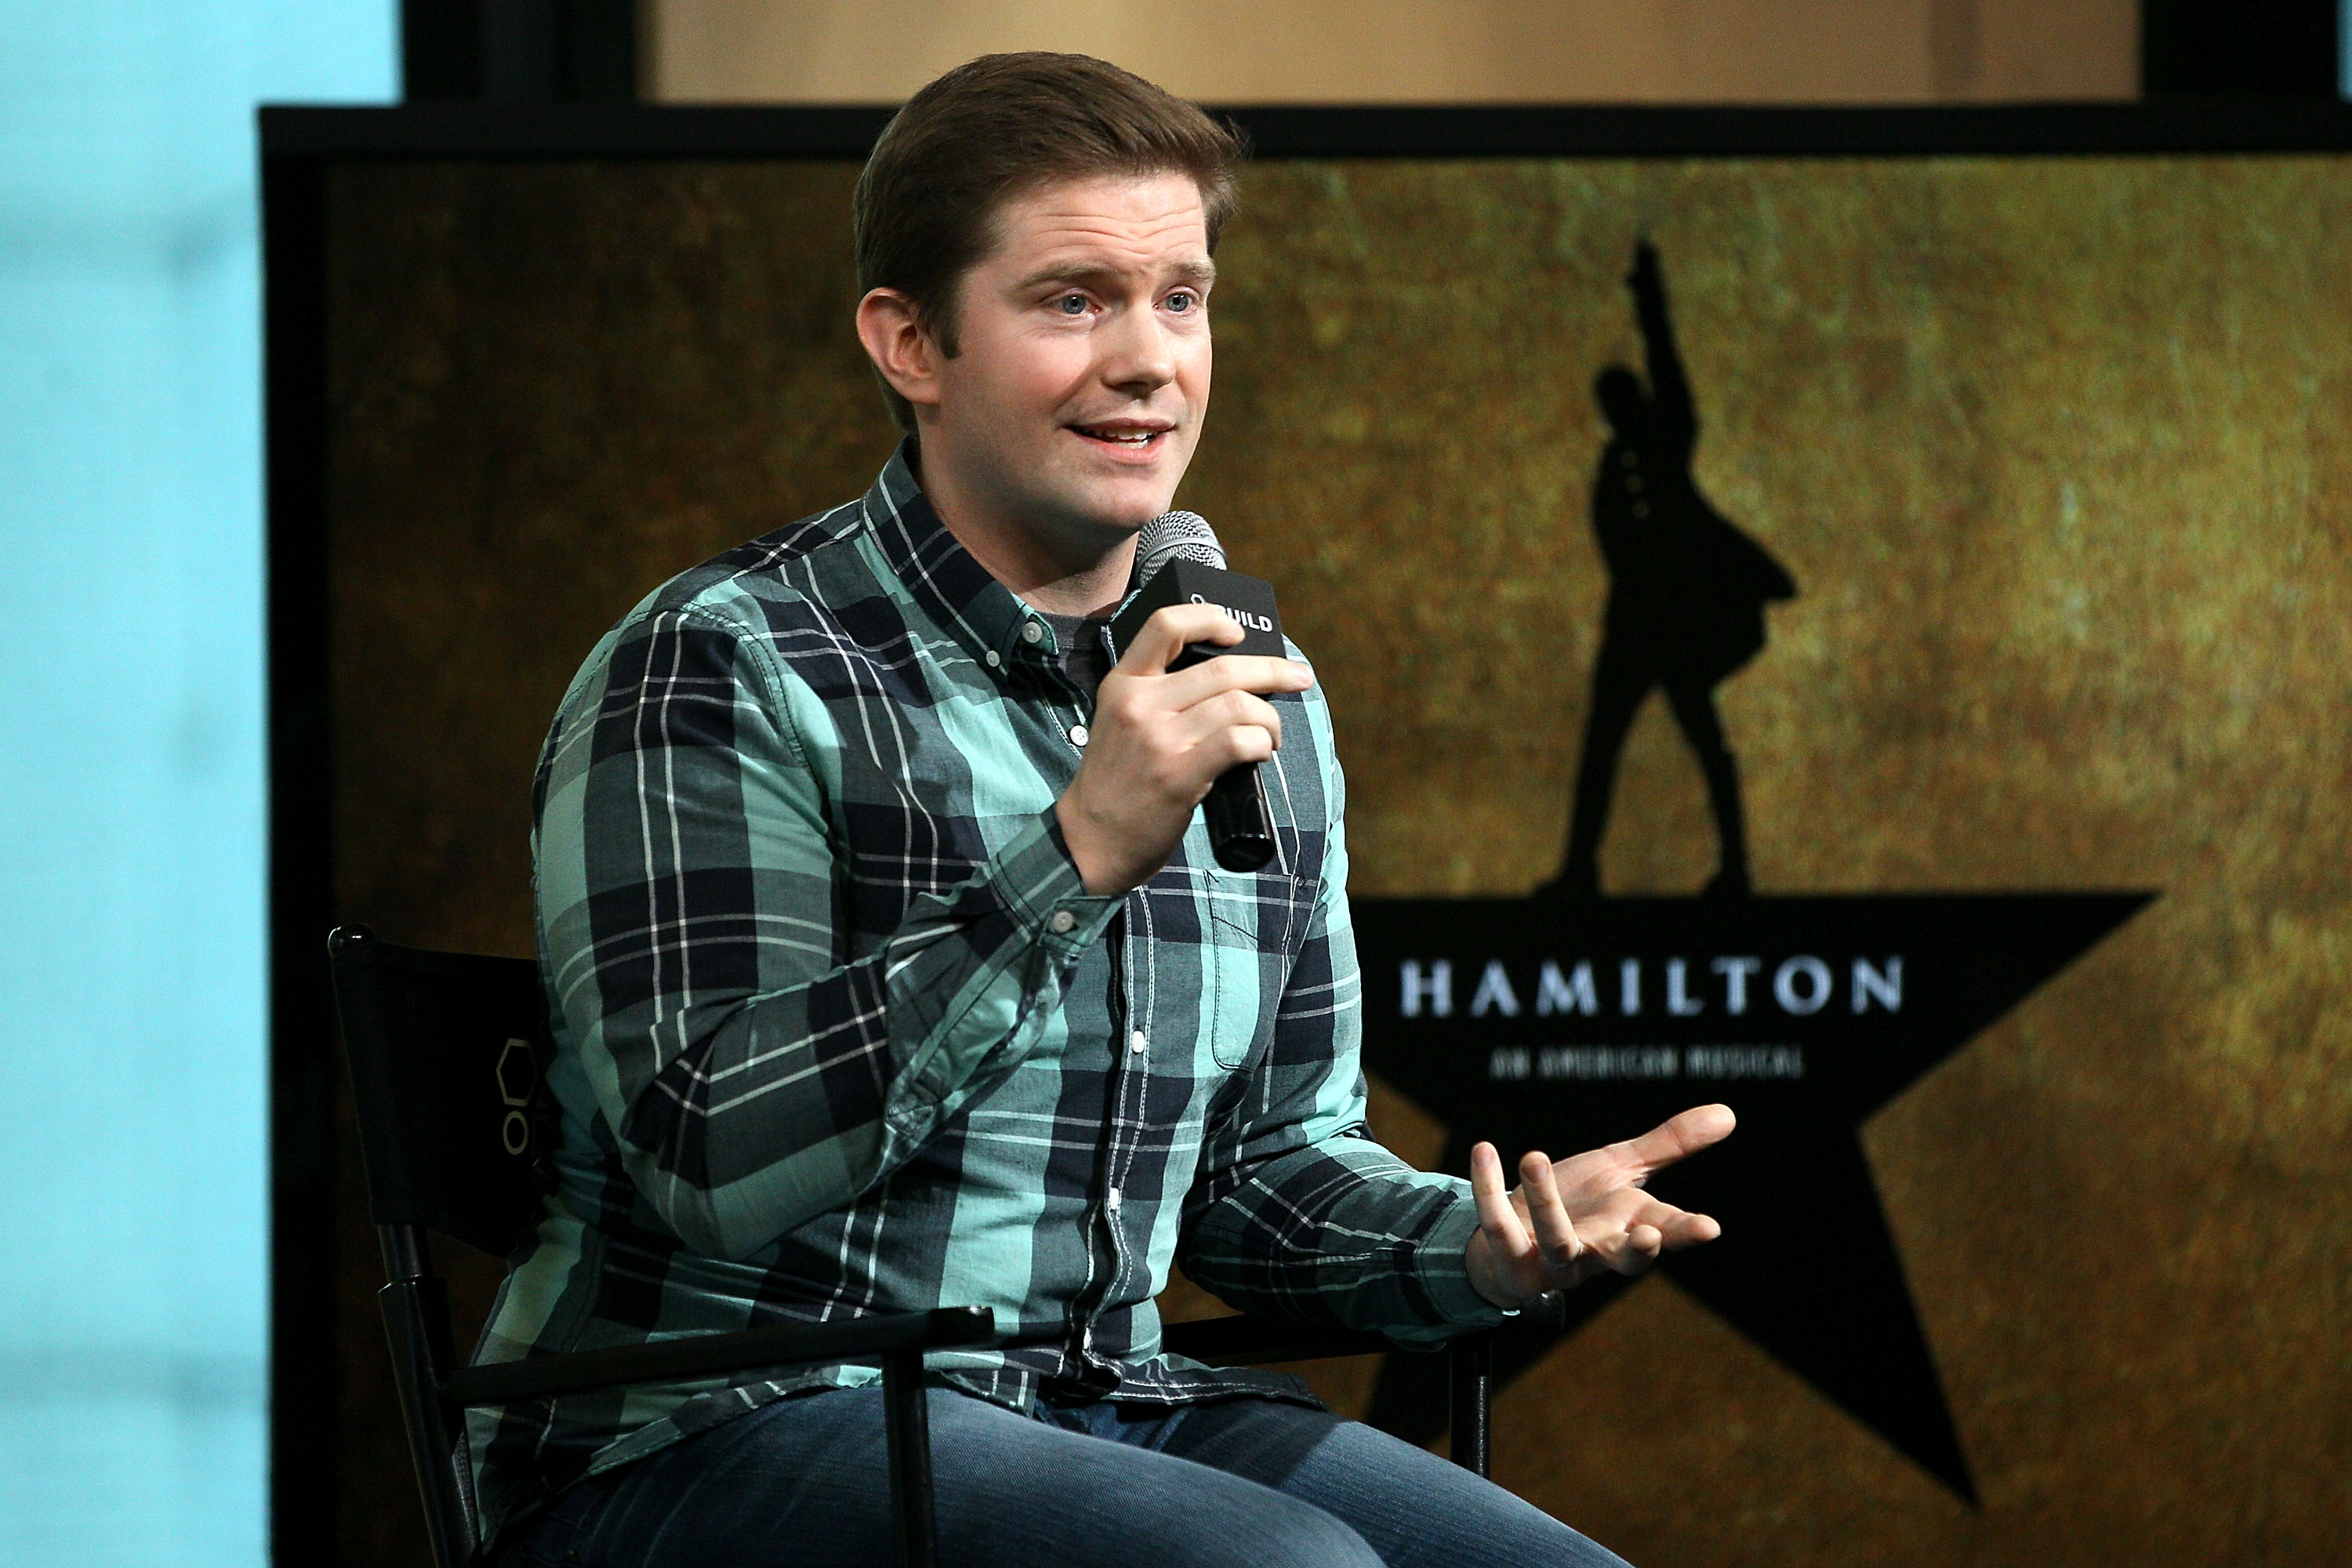 Rory O'Malley discussing Hamilton at AOL’s headquarters in New York City.
